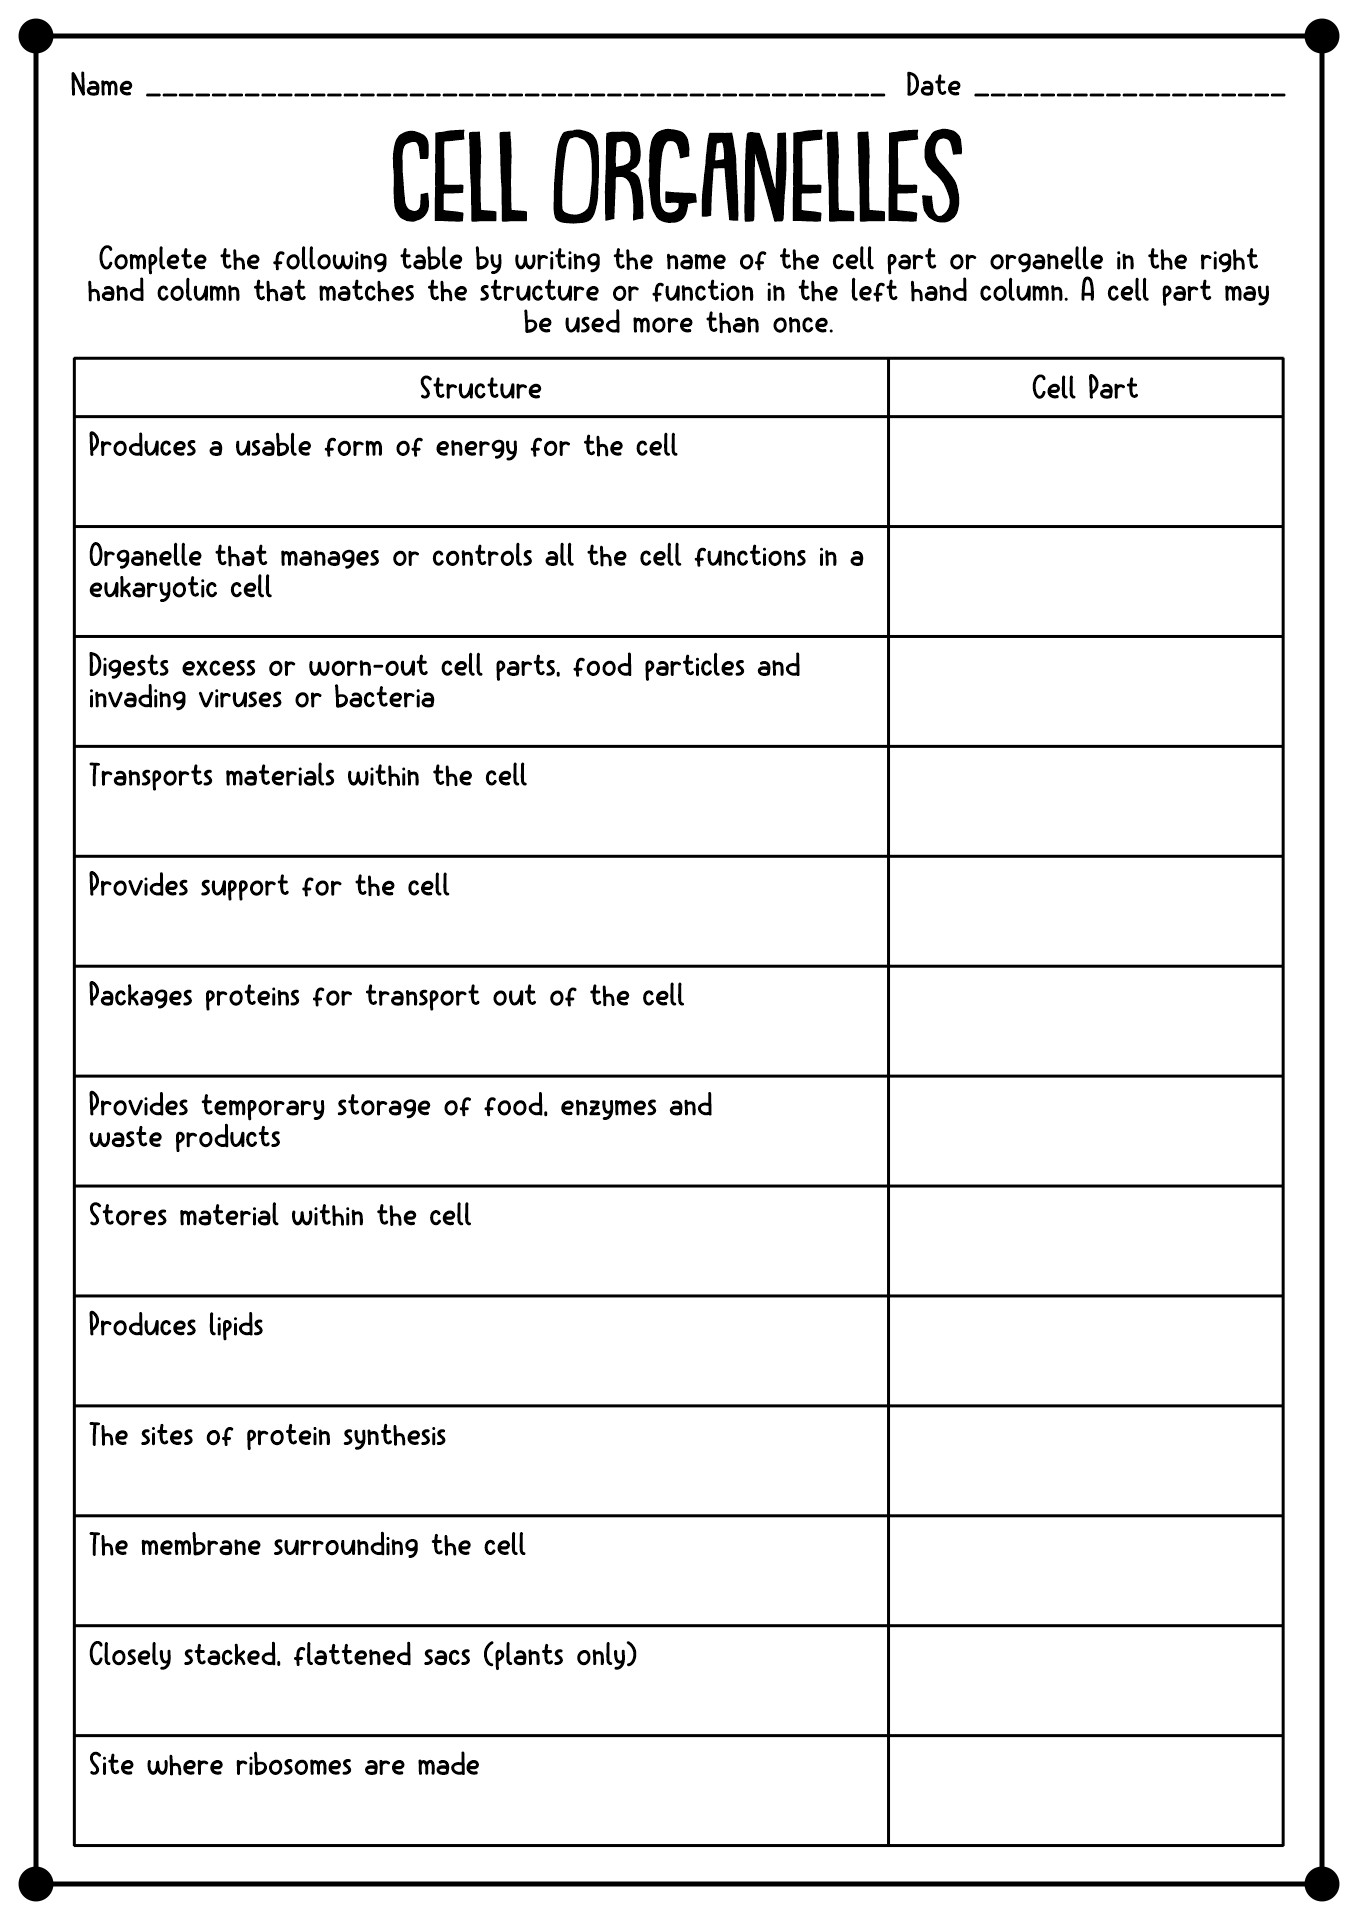 12-best-images-of-science-worksheets-all-cells-7th-grade-life-science-worksheets-biology-cell